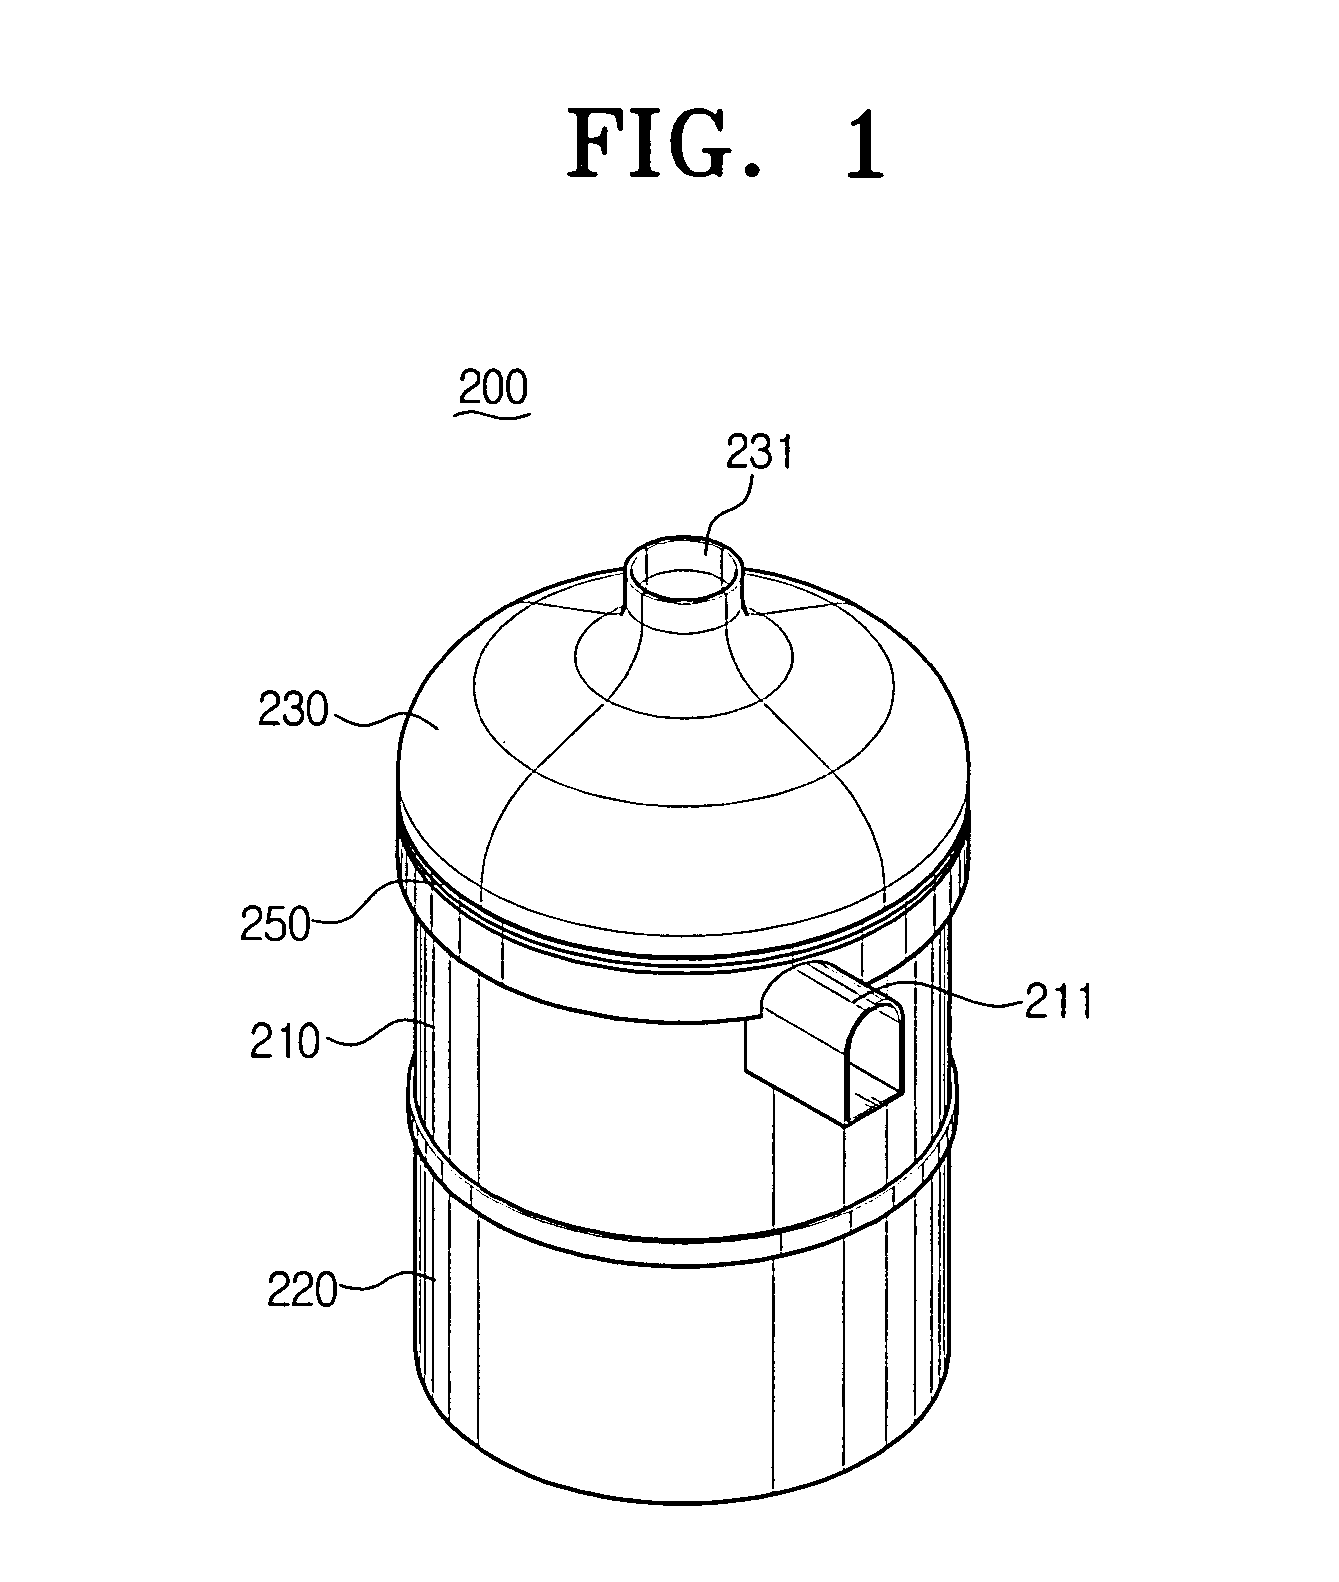 Cyclone dust separating apparatus for vacuum cleaner and vacuum cleaner having the same